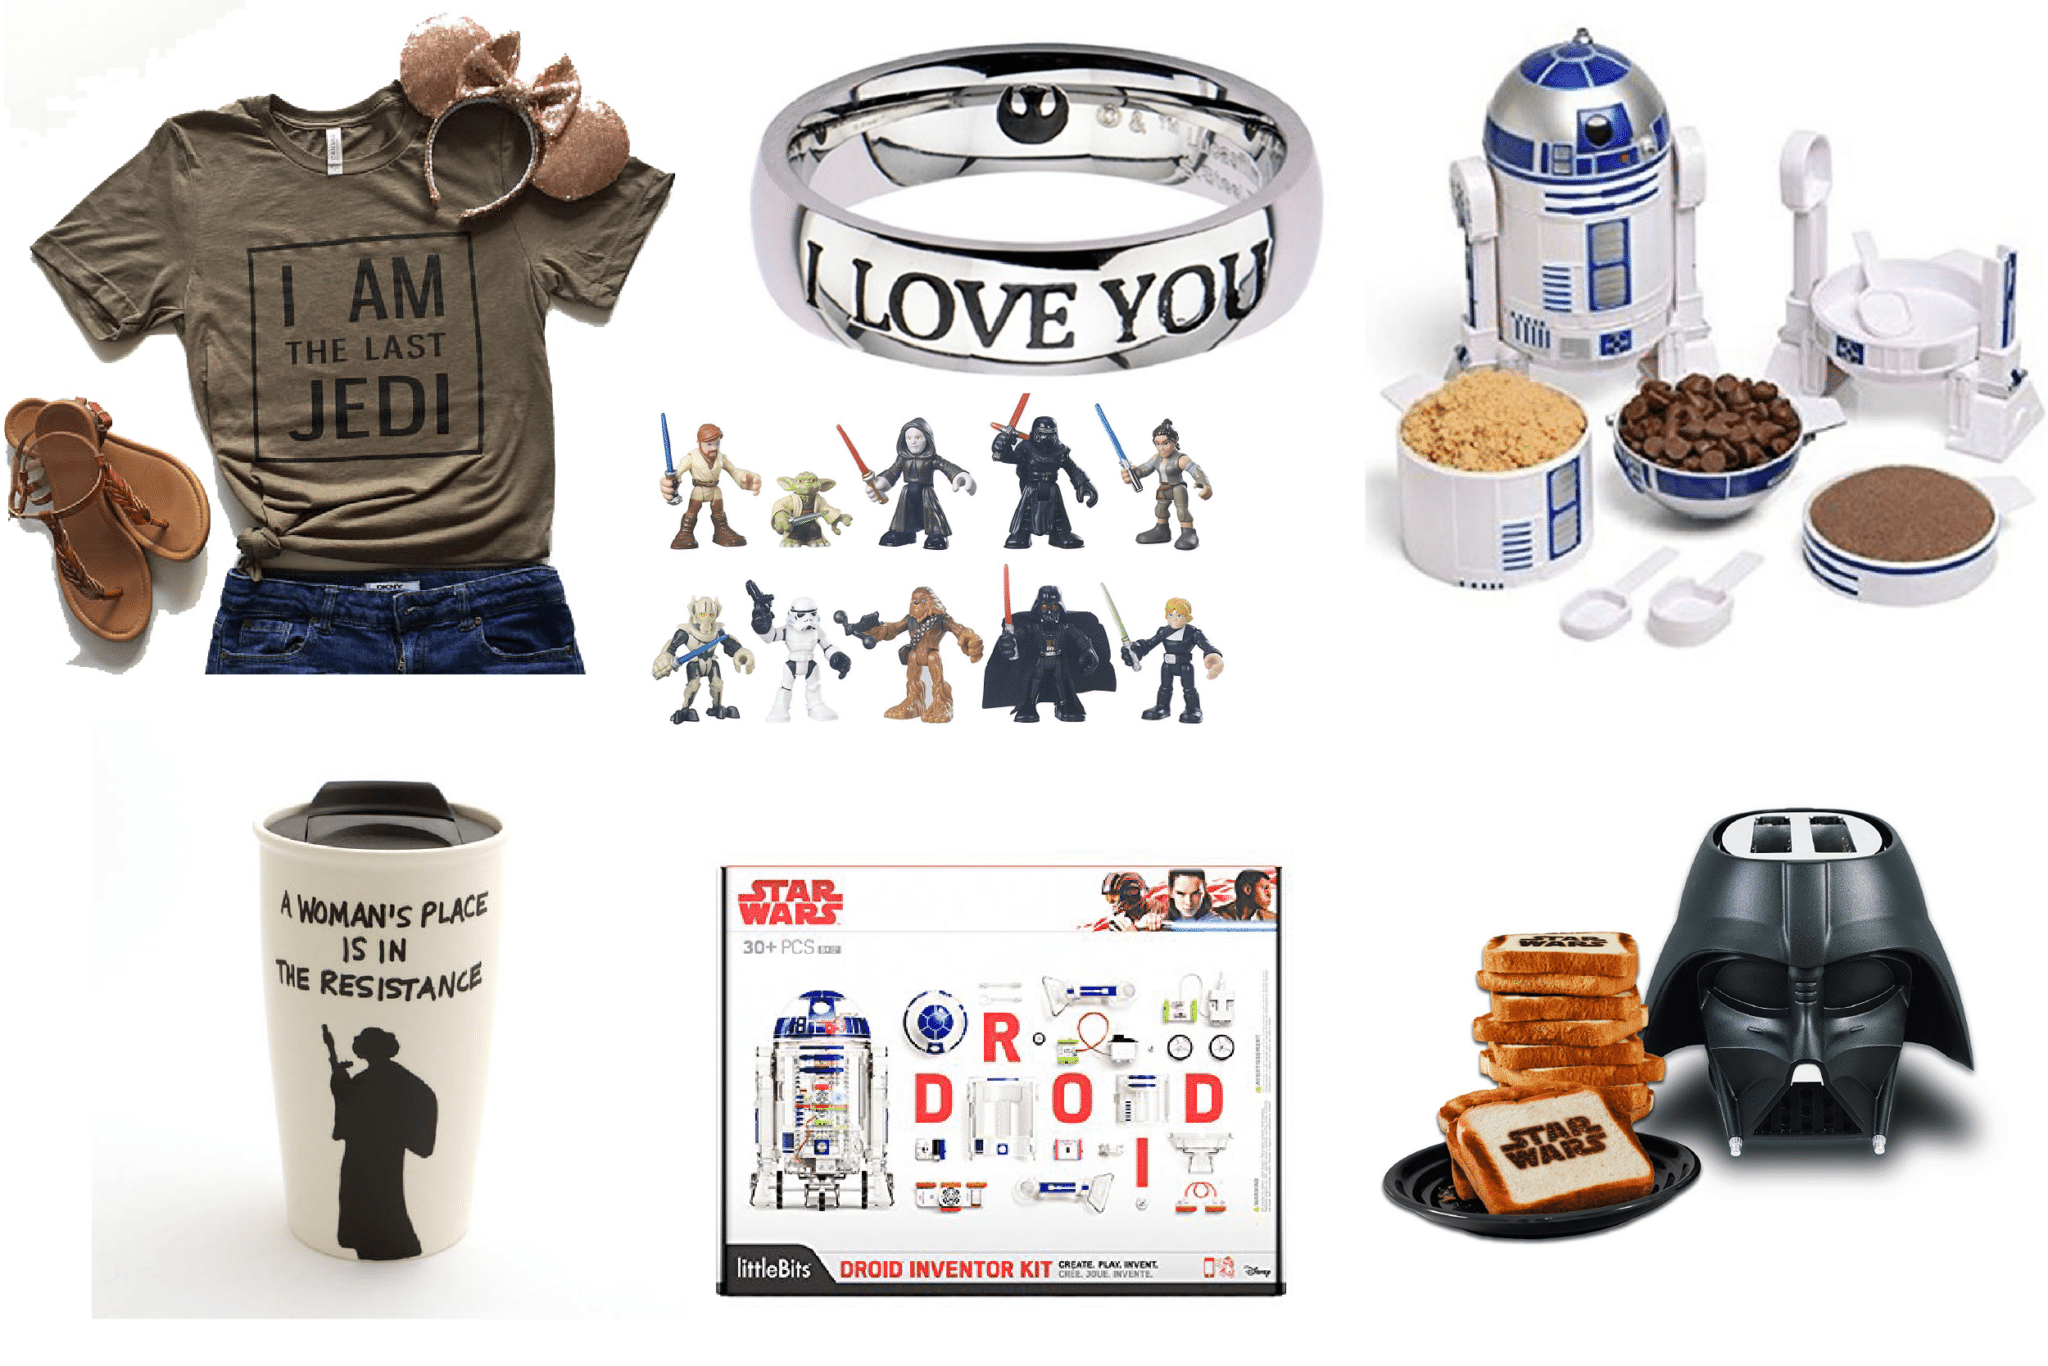 The 21 best Star Wars gifts to buy diehard fans on May 4